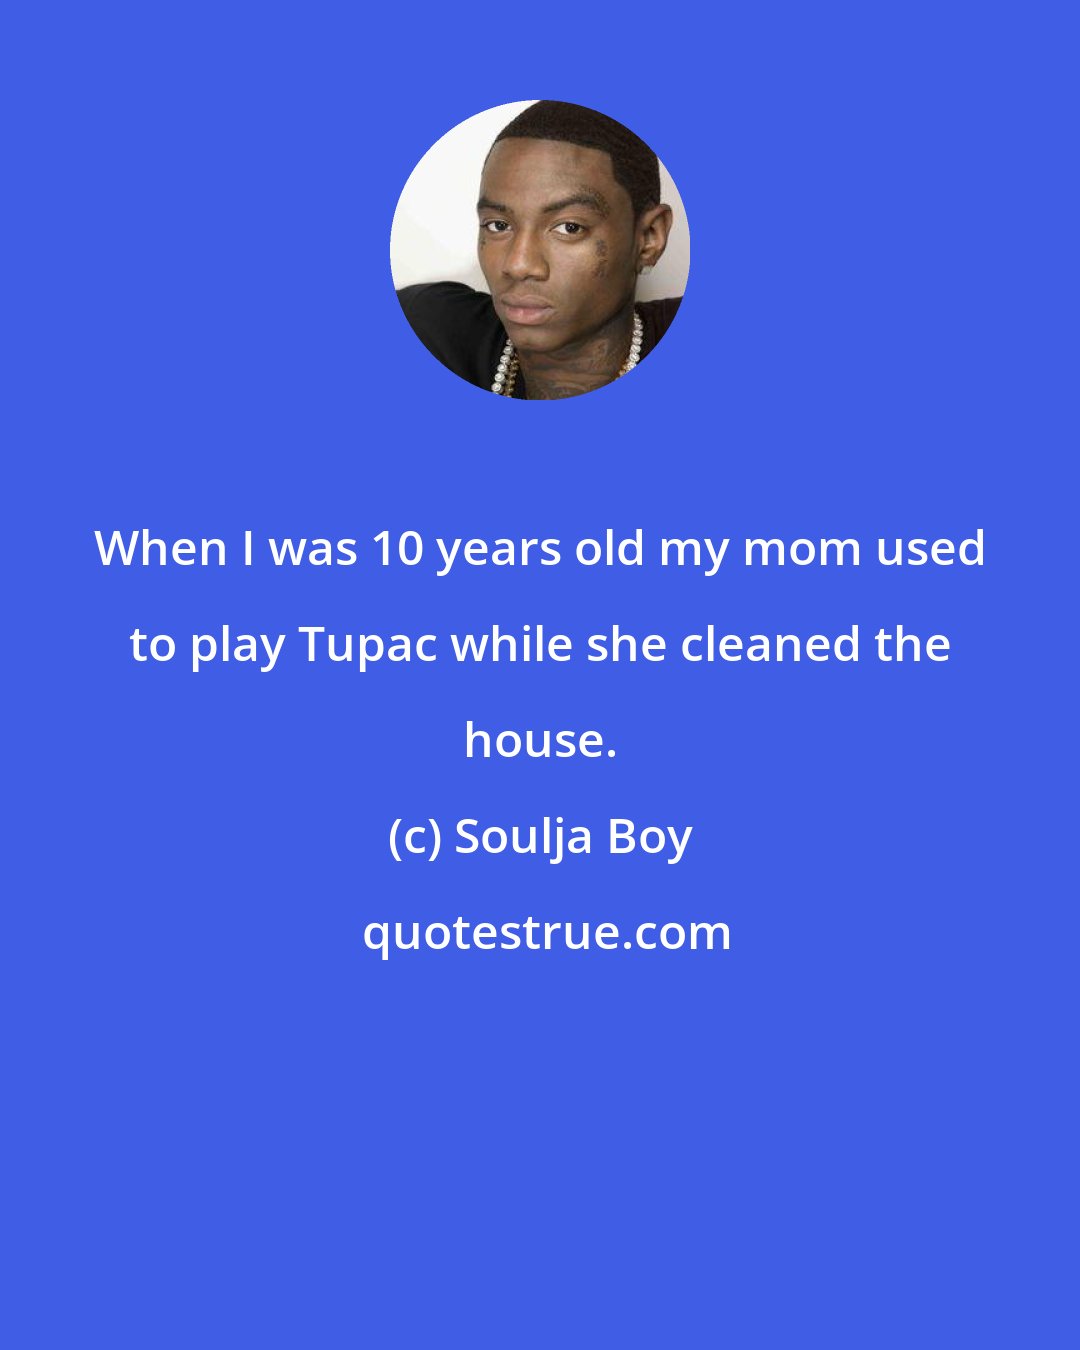 Soulja Boy: When I was 10 years old my mom used to play Tupac while she cleaned the house.